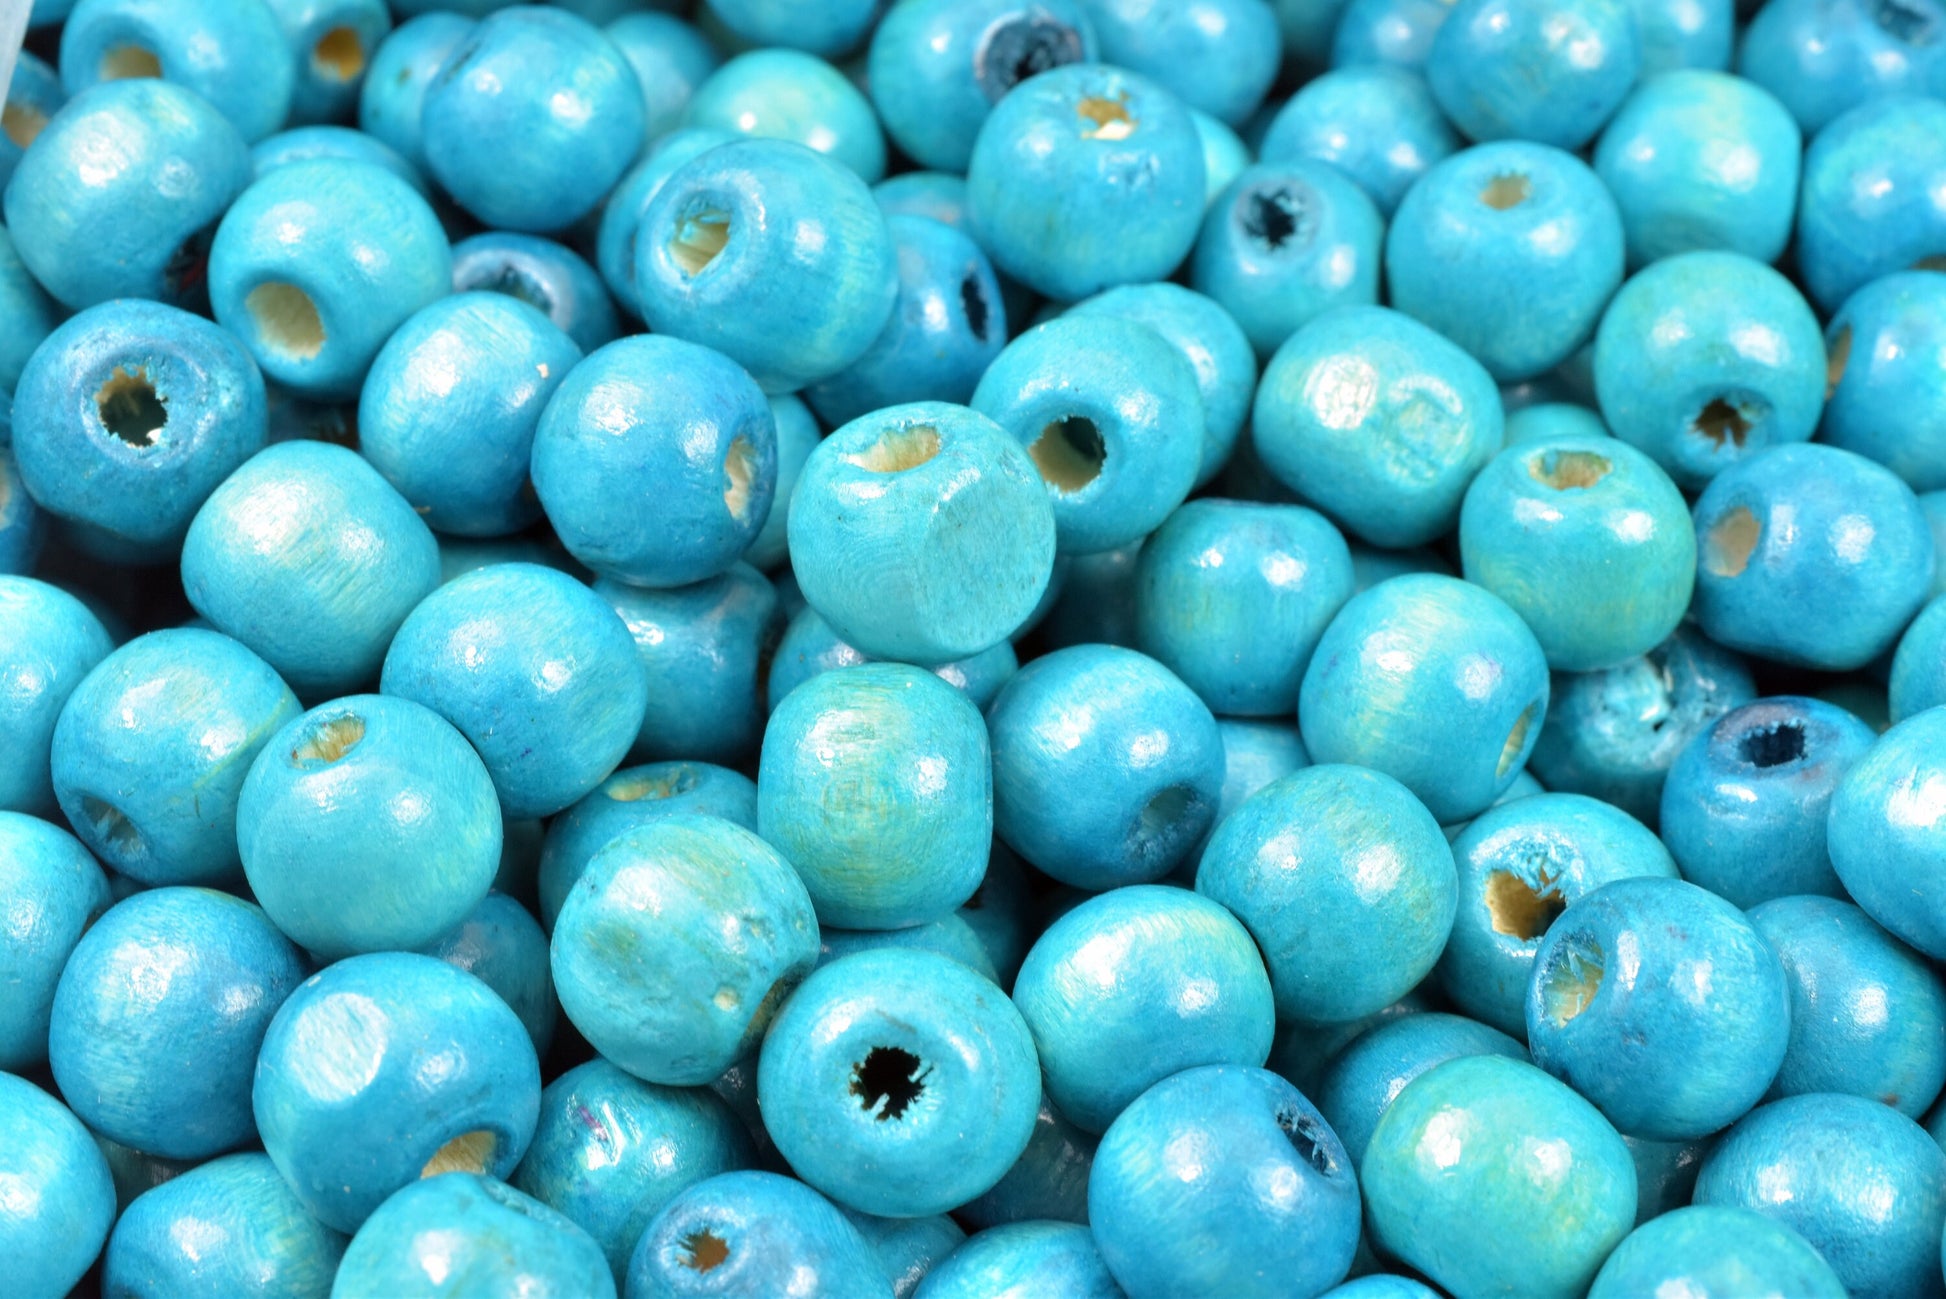 Turquoise Wood Round Beads Sizes 10mm Hole Size 2-3mm, 1300 PCs, (Blue-Green) Finding Parts For Jewelry Making